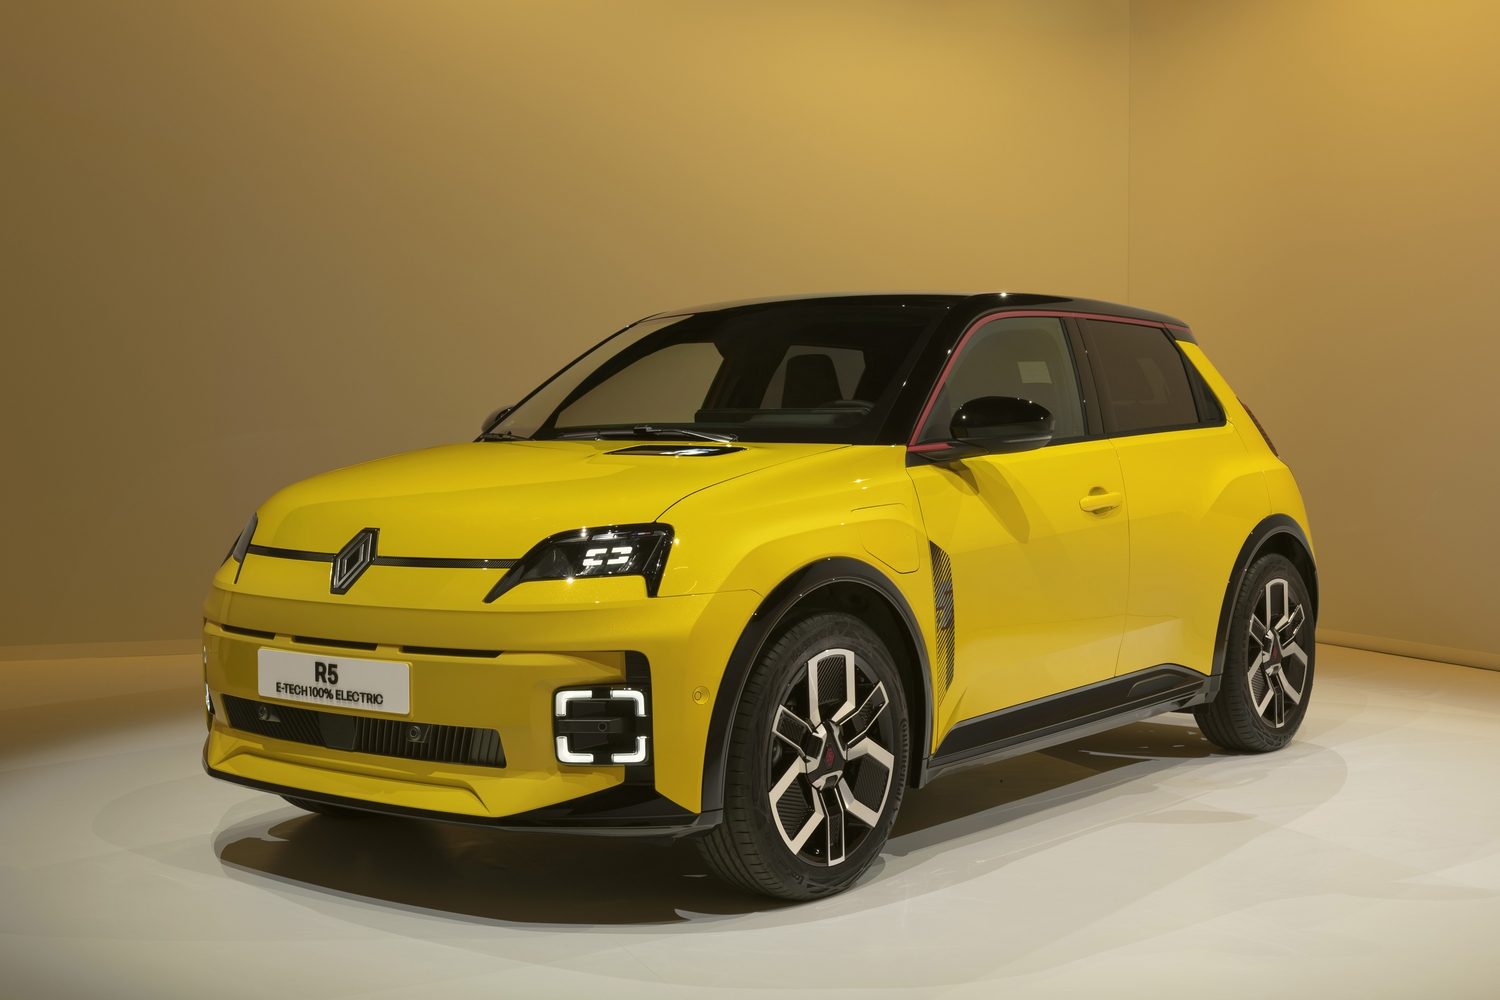 Electric Renault 5 revealed in full. Image by Renault.